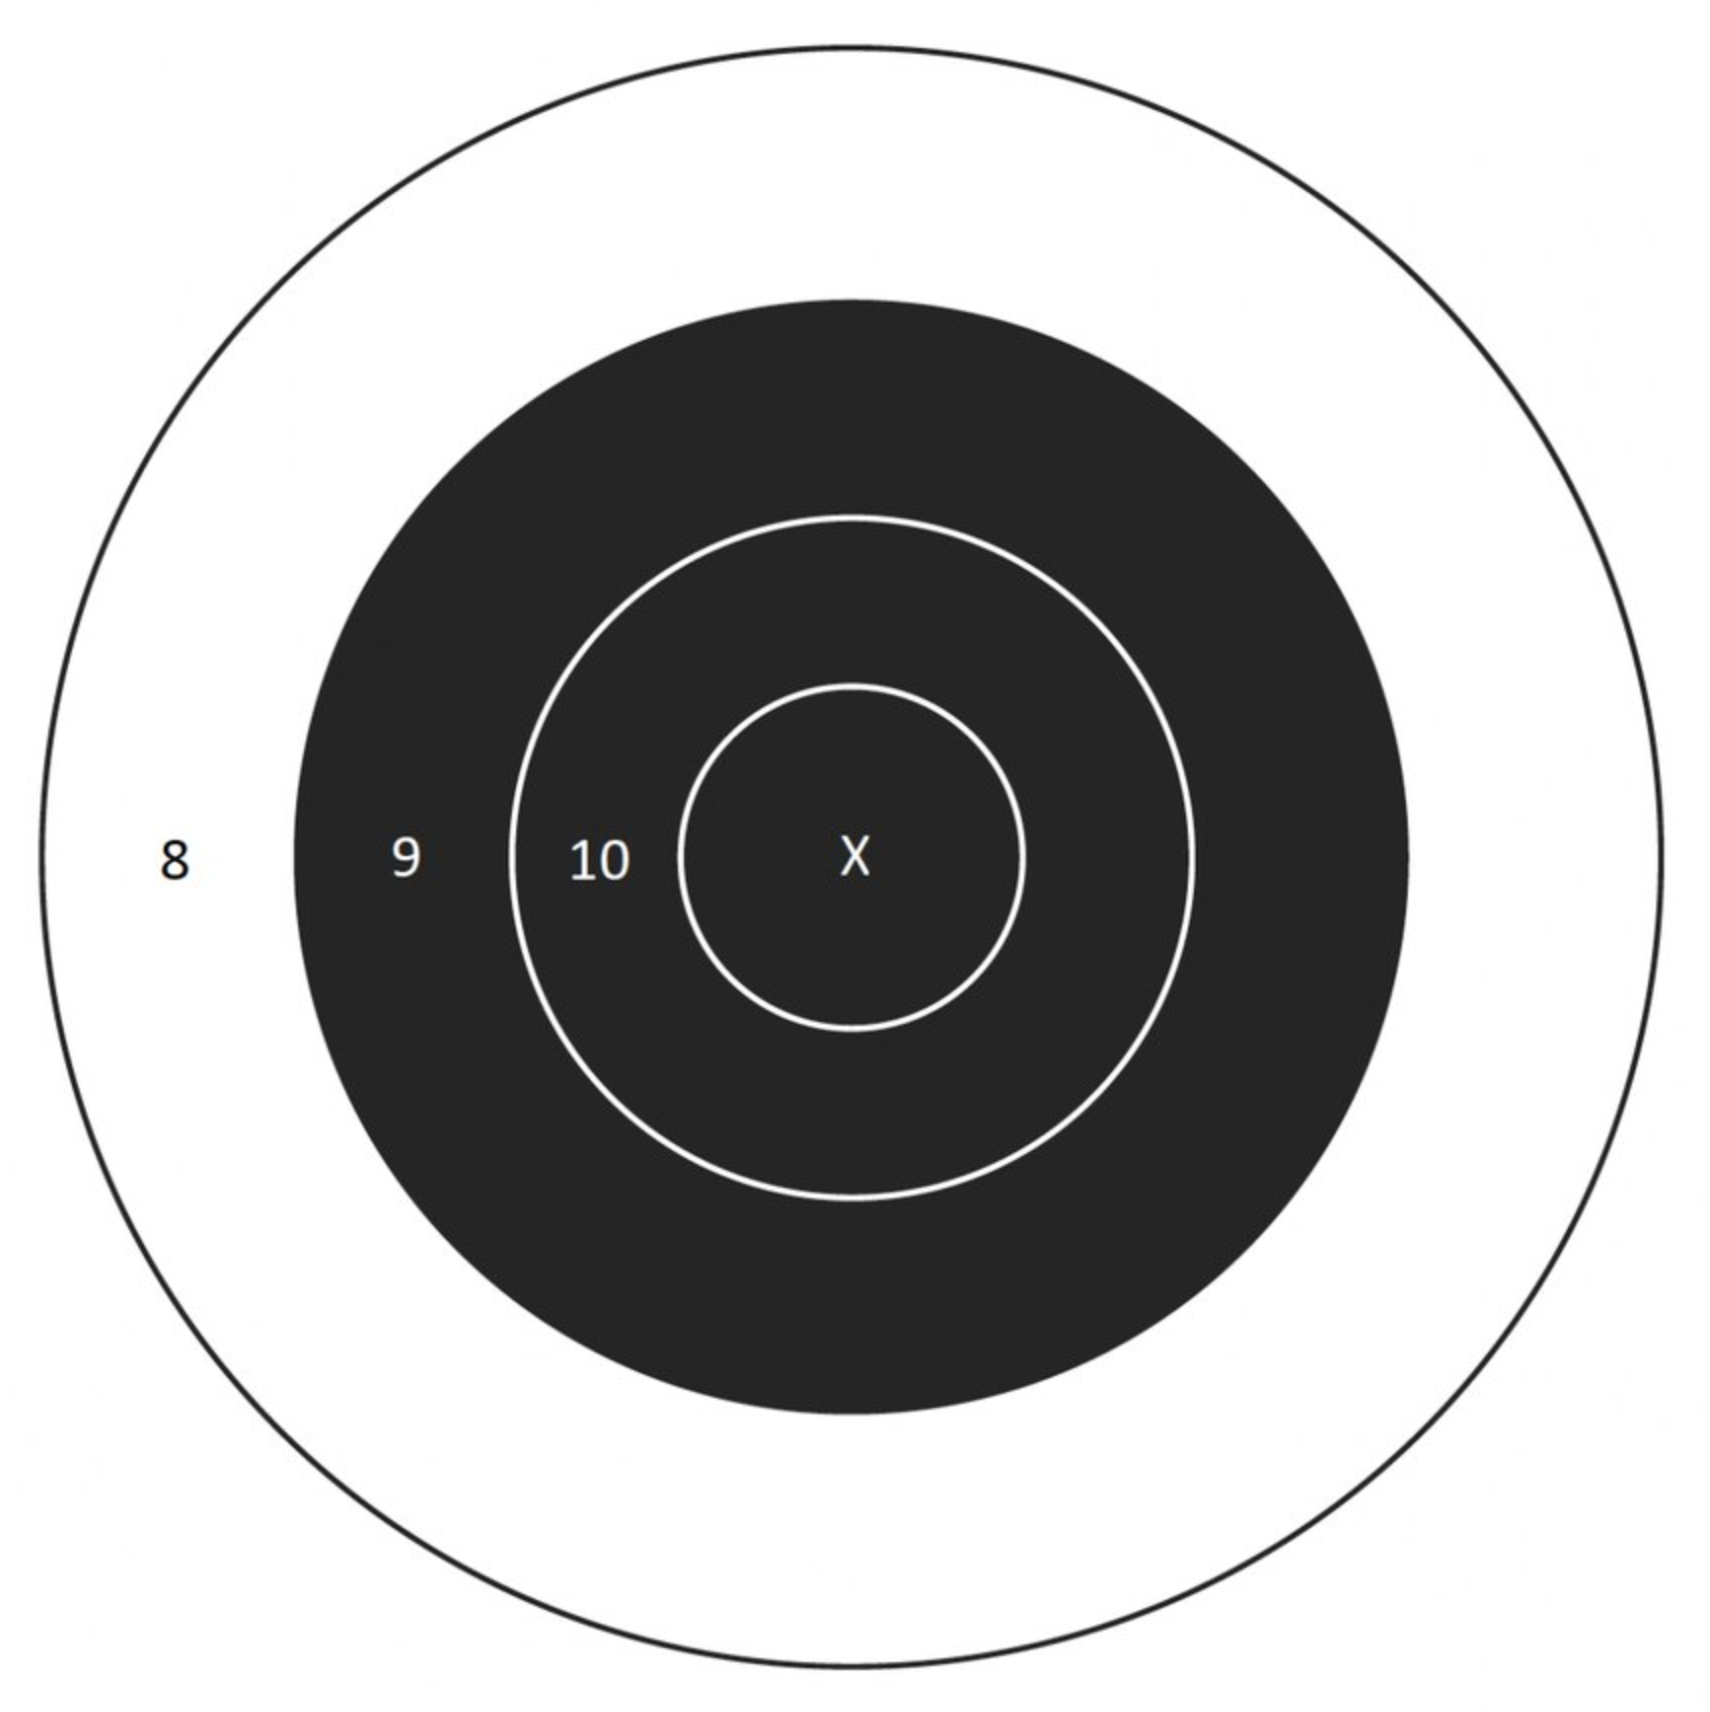 An example of a B8 target